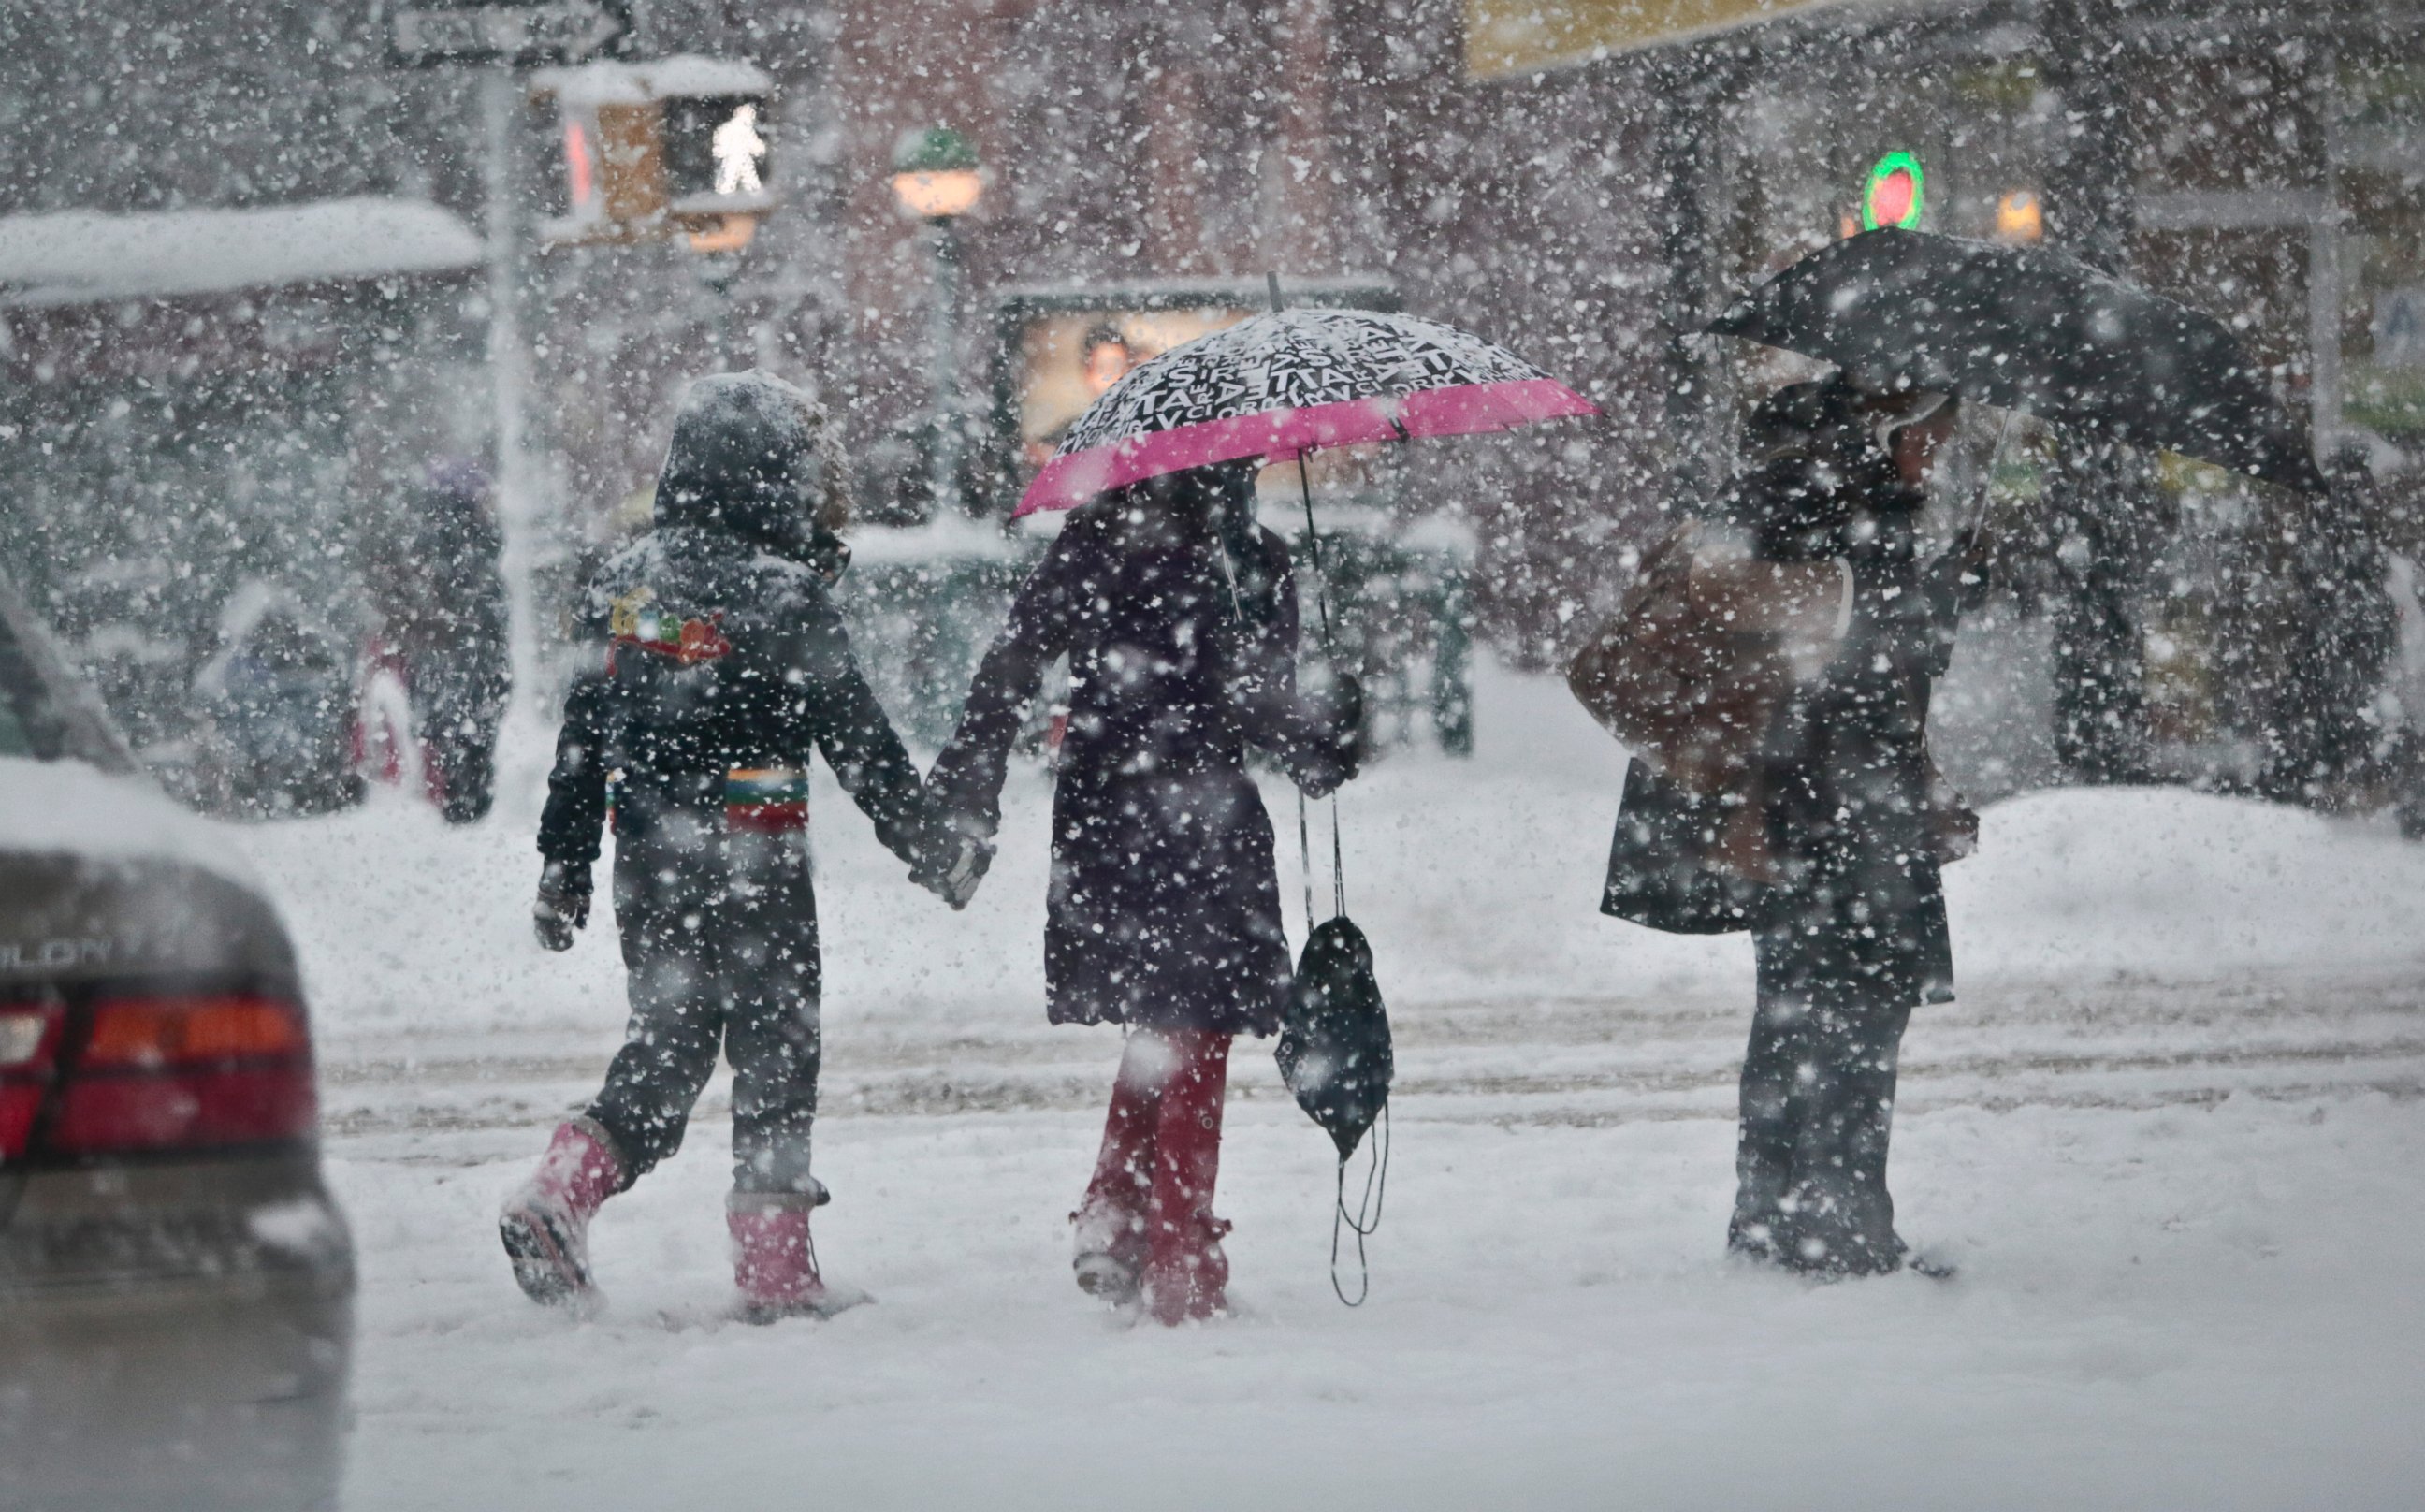 PHOTO: Pedestrians walk along Nostrand Avenue as snowfall blankets the area, Feb. 13, 2014, in the Flatbush section of the Brooklyn borough of N.Y.